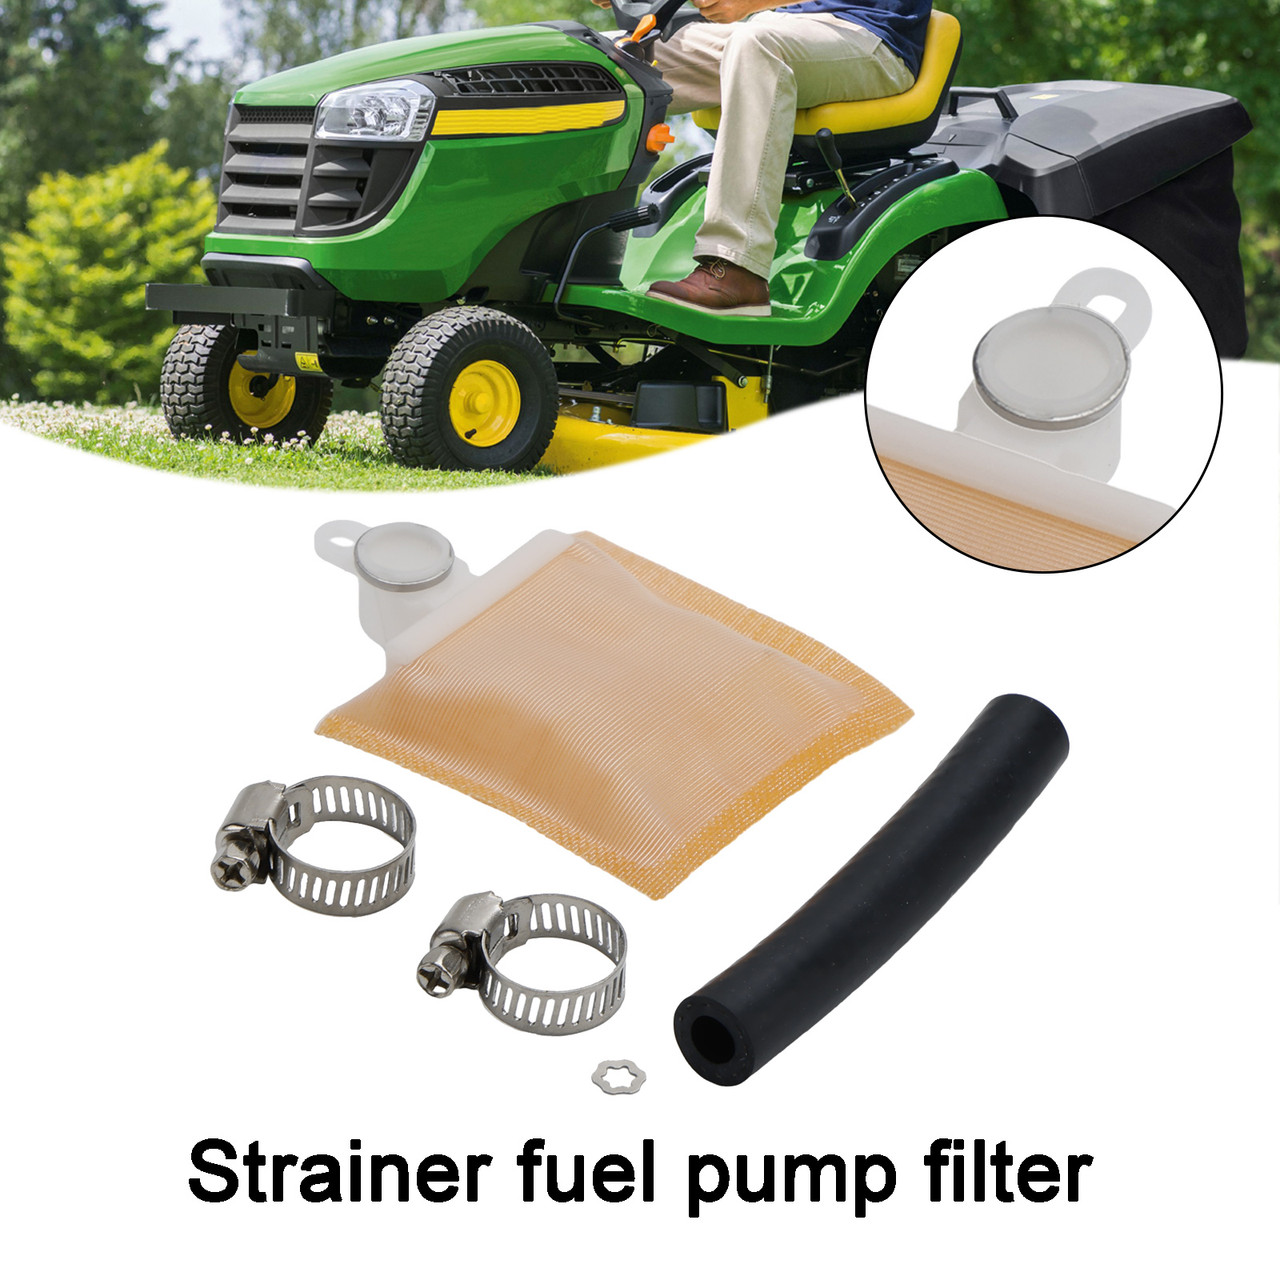 AM117116 Strainer fuel pump filter TY22462 For John Deere Lawn 425 445 455